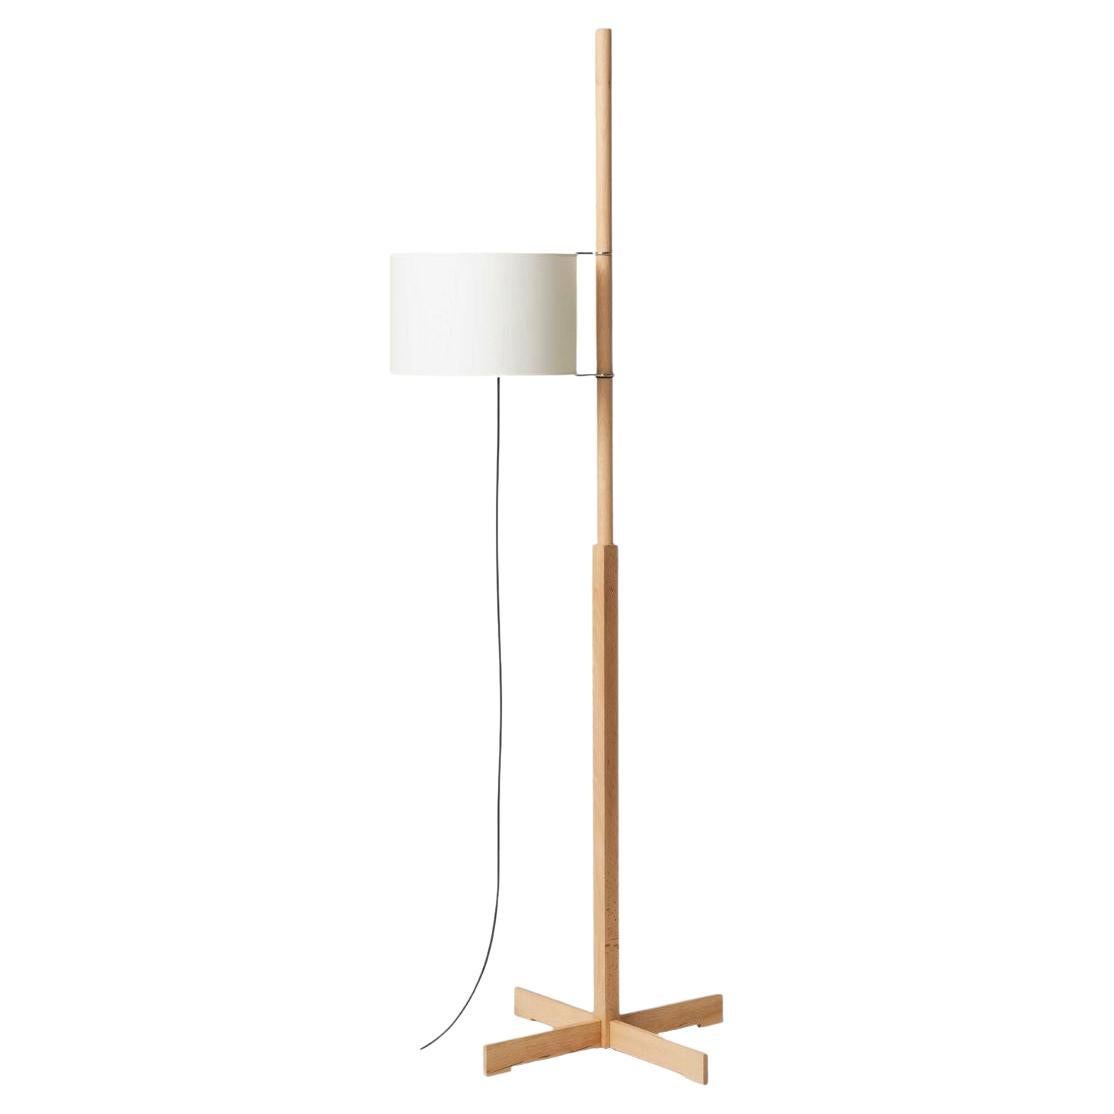 Miguel Milá 'Tmm' Floor Lamp in Beech Wood and White Parchment for Santa & Cole For Sale